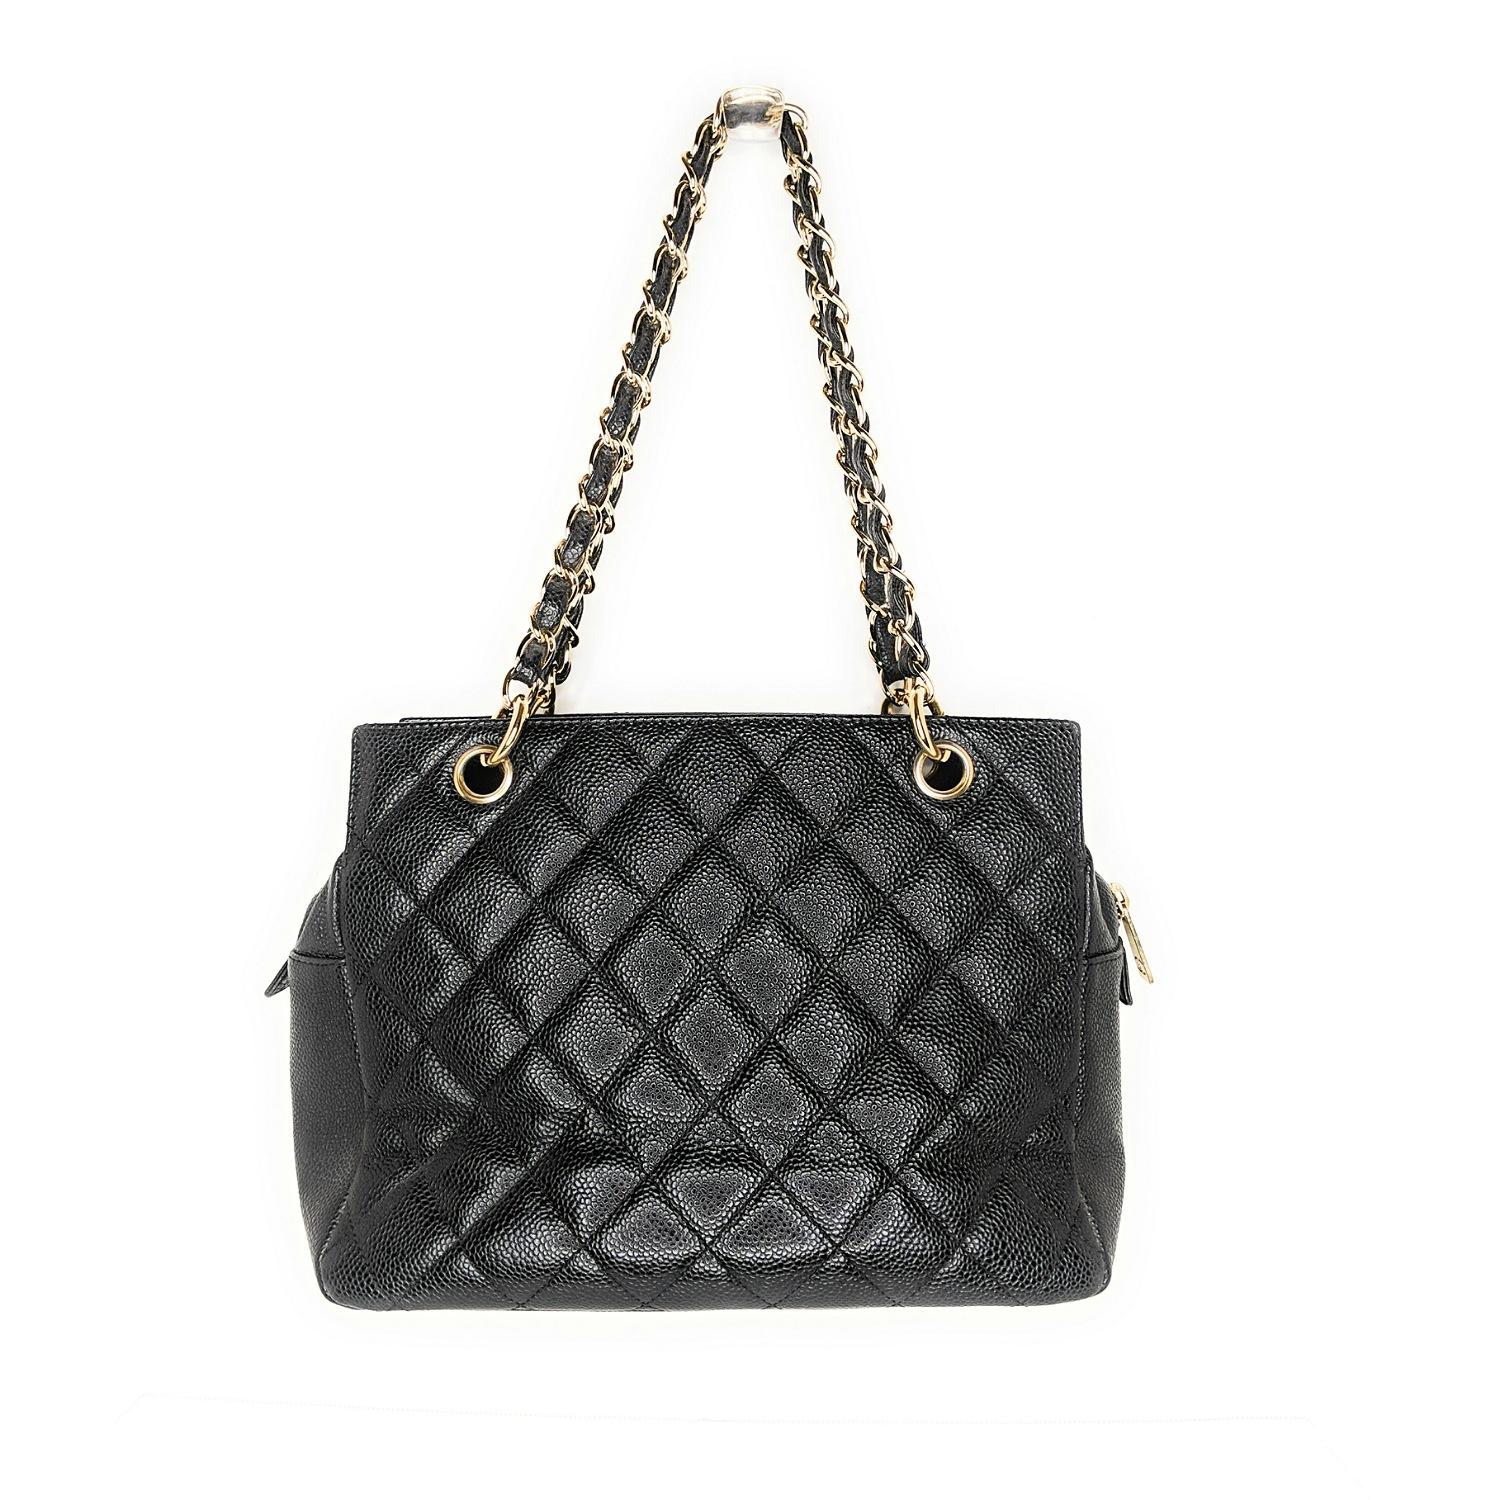 The Chanel Quilted Caviar Leather Petite Timeless Shopping Tote Bag is the rarest of the Chanel Shopping Tote bags and is aptly named. This elegant bag is truly timeless and will always look chic and fashionable. It is made of beautiful quilted